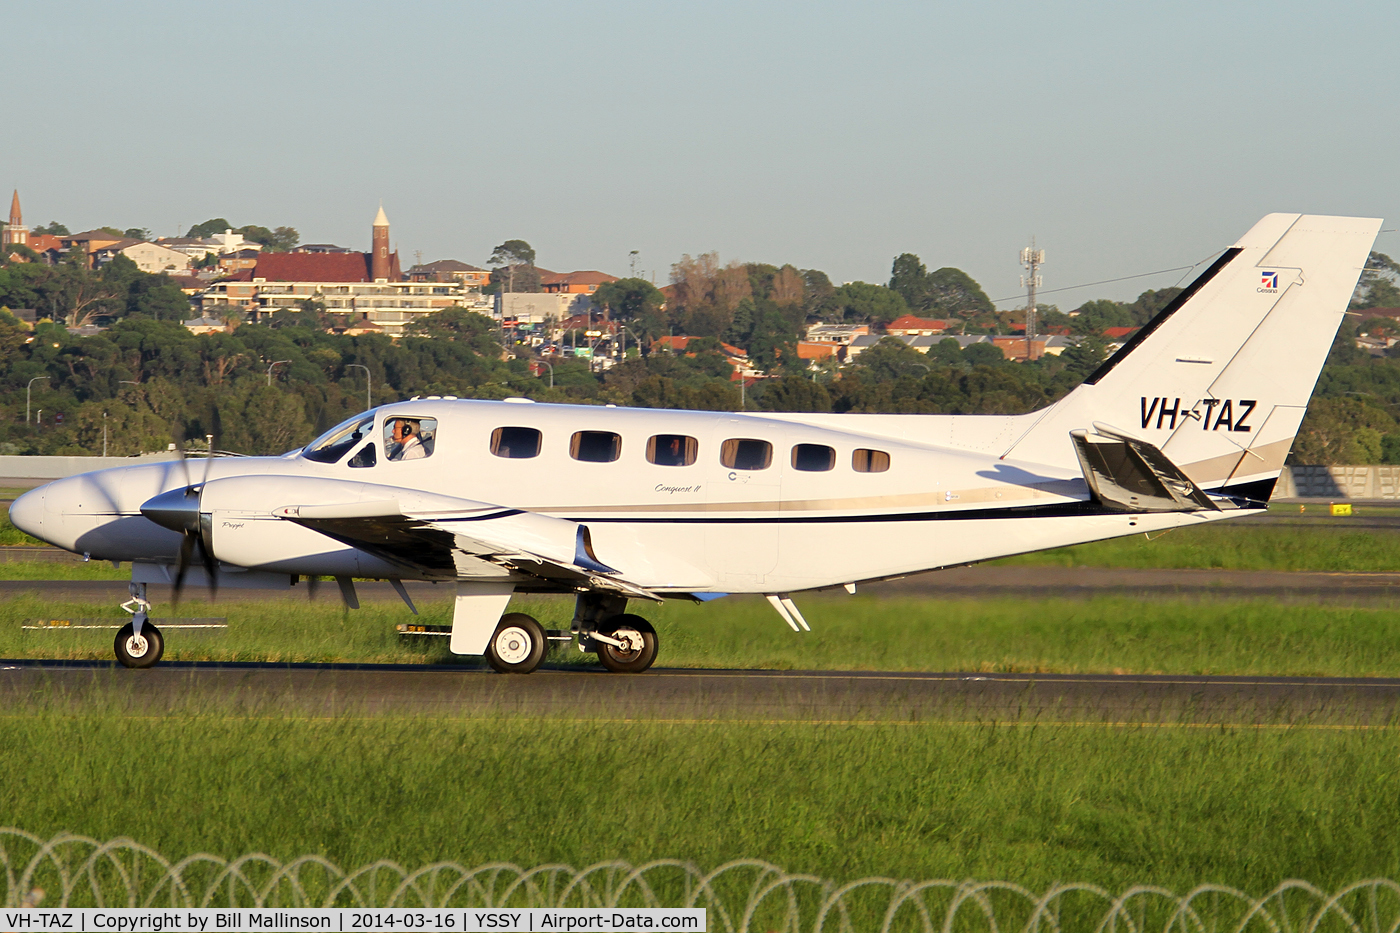 VH-TAZ, 1977 Cessna 441 Conquest II C/N 441-0005, taxiing to 34R